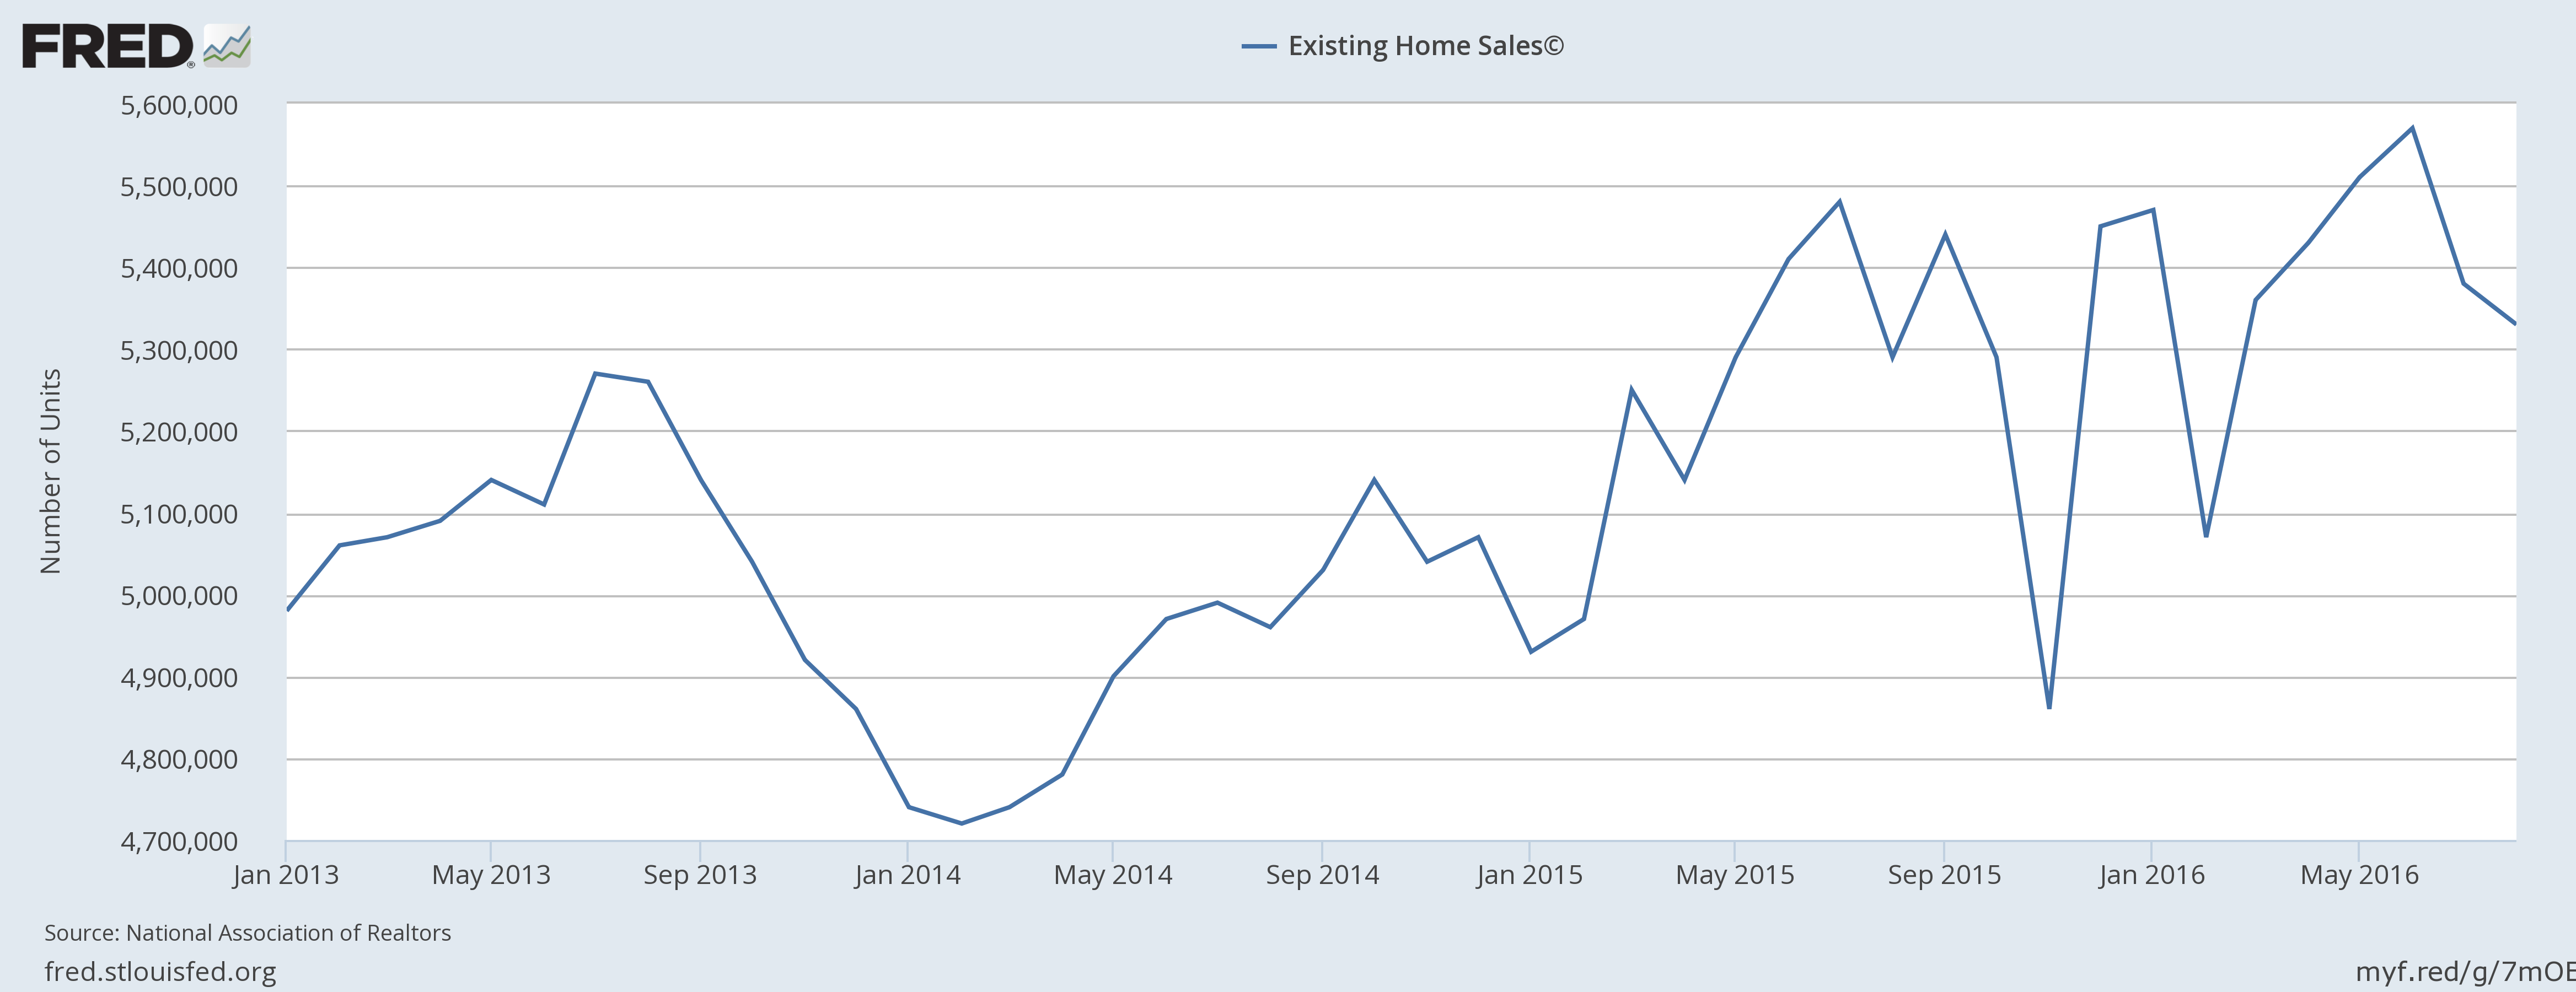 Existing Home Sales 2013-2016